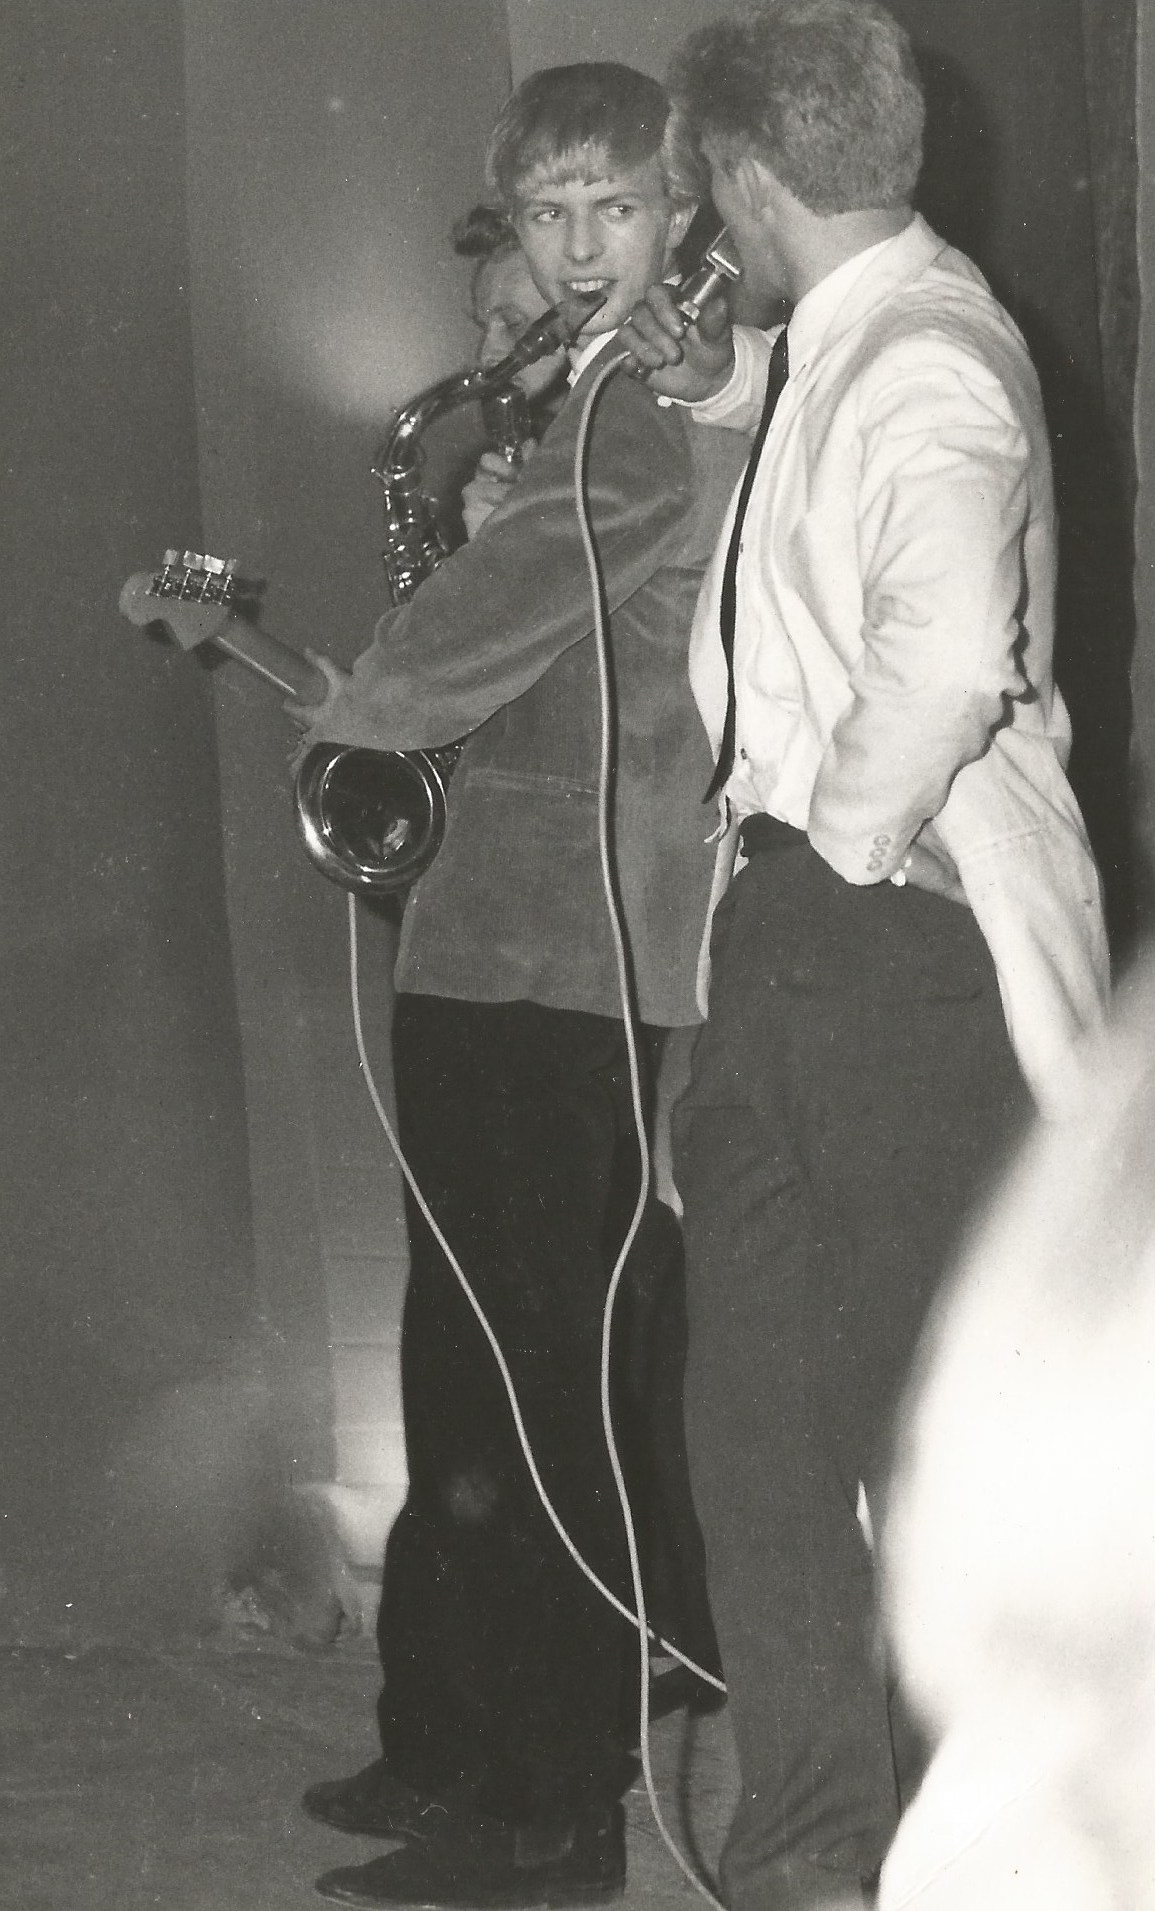 Young David Bowie performs with his first band in 1963 | Source: Getty Images